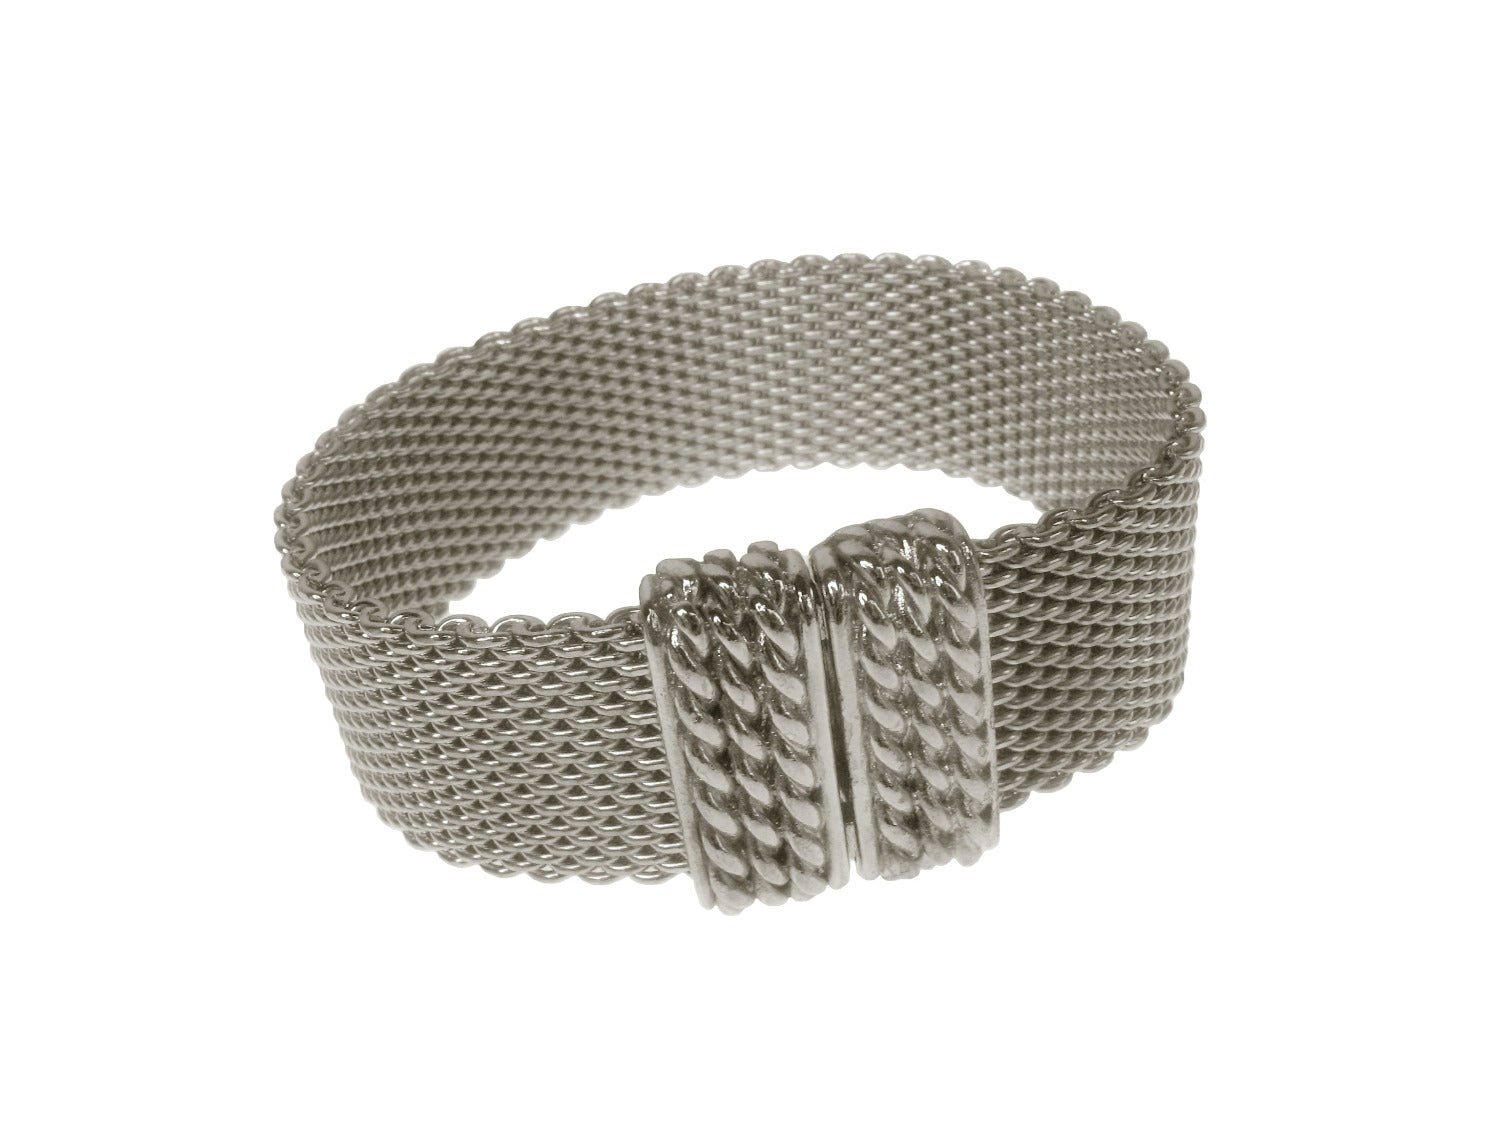 Flat Mesh Bracelet with Square Hook Clasp